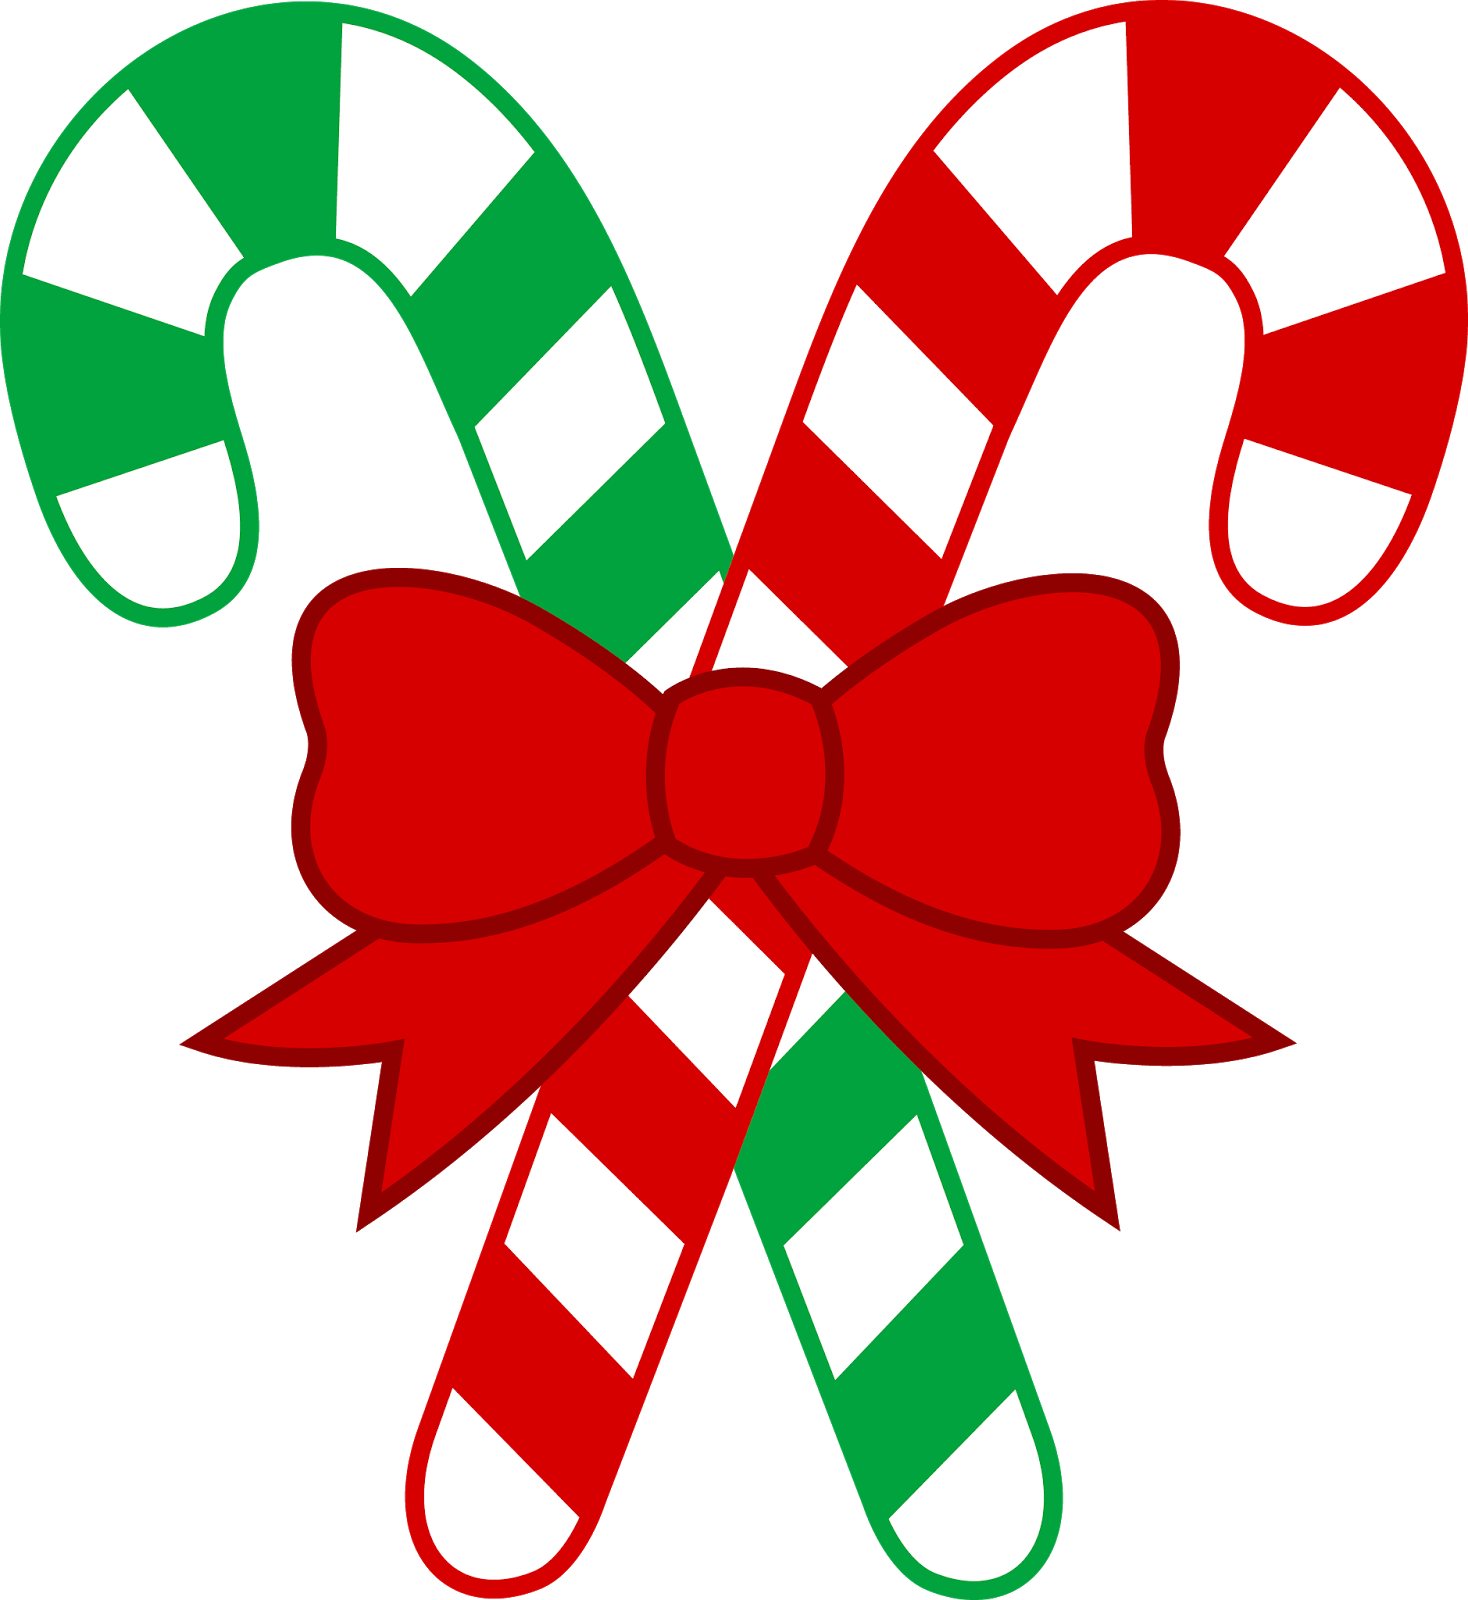 Christmas holiday at getdrawings. Candyland clipart candy cane